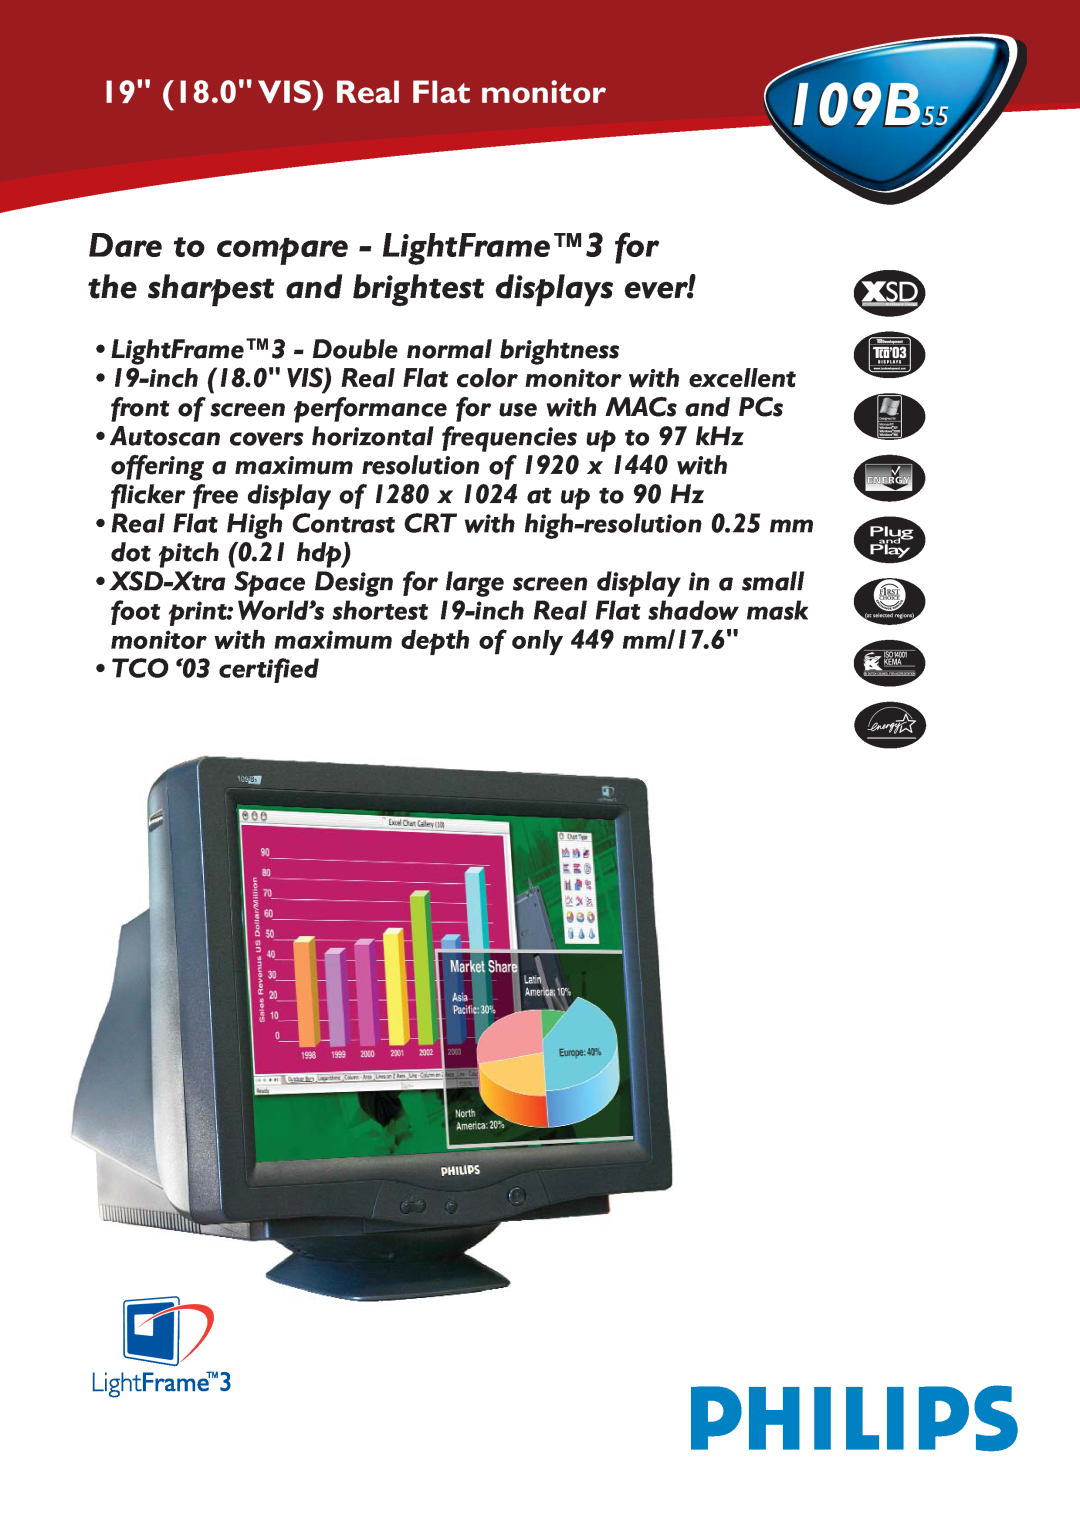 Philips 109B55 manual 19 18.0 VIS Real Flat monitor, LightFrame3 - Double normal brightness, TCO ‘03 certified 